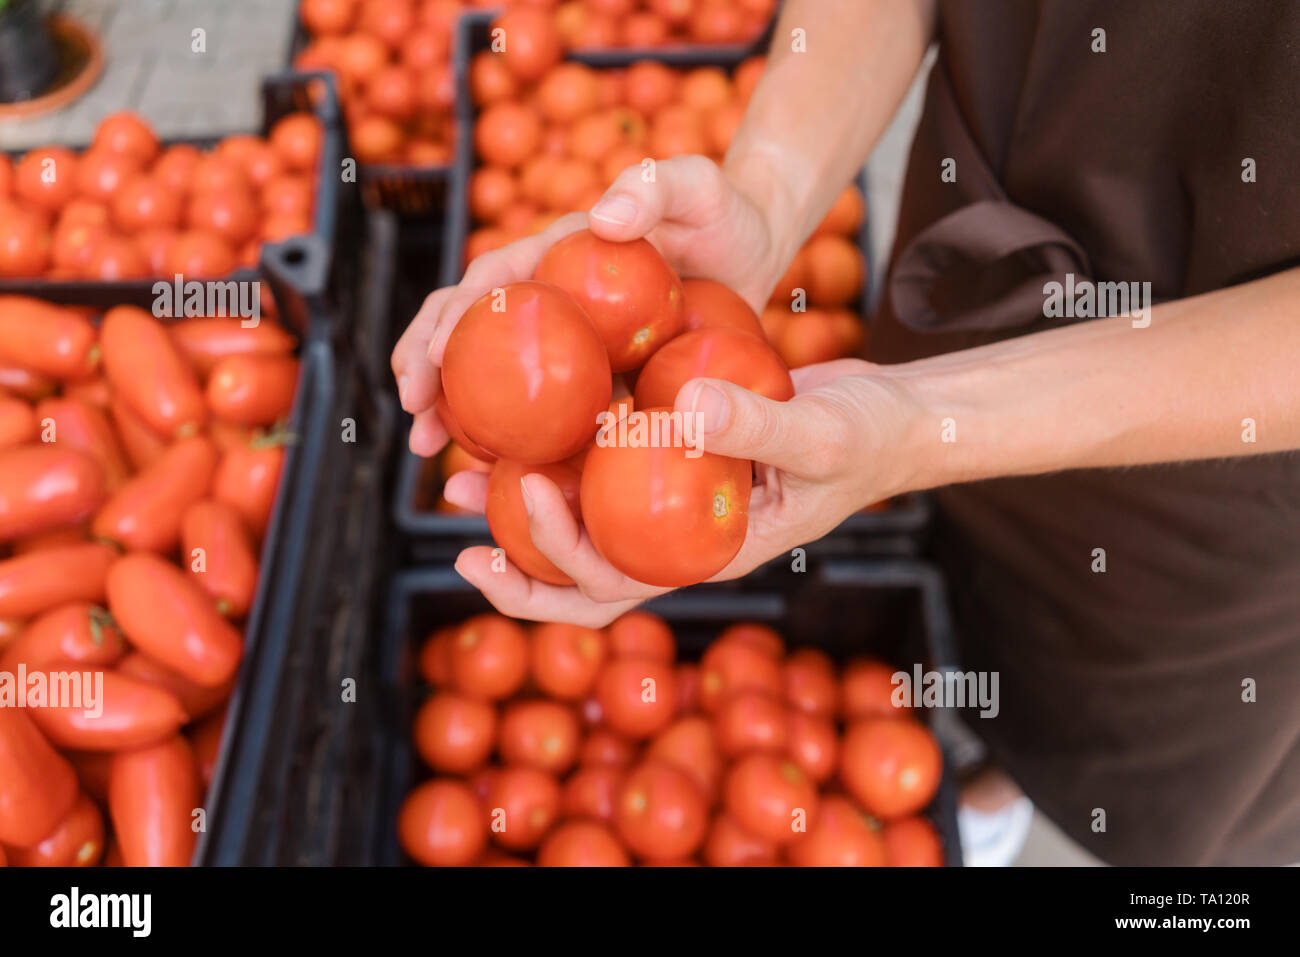 Commercial gardener showing tomatoes she grew  Stock Photo